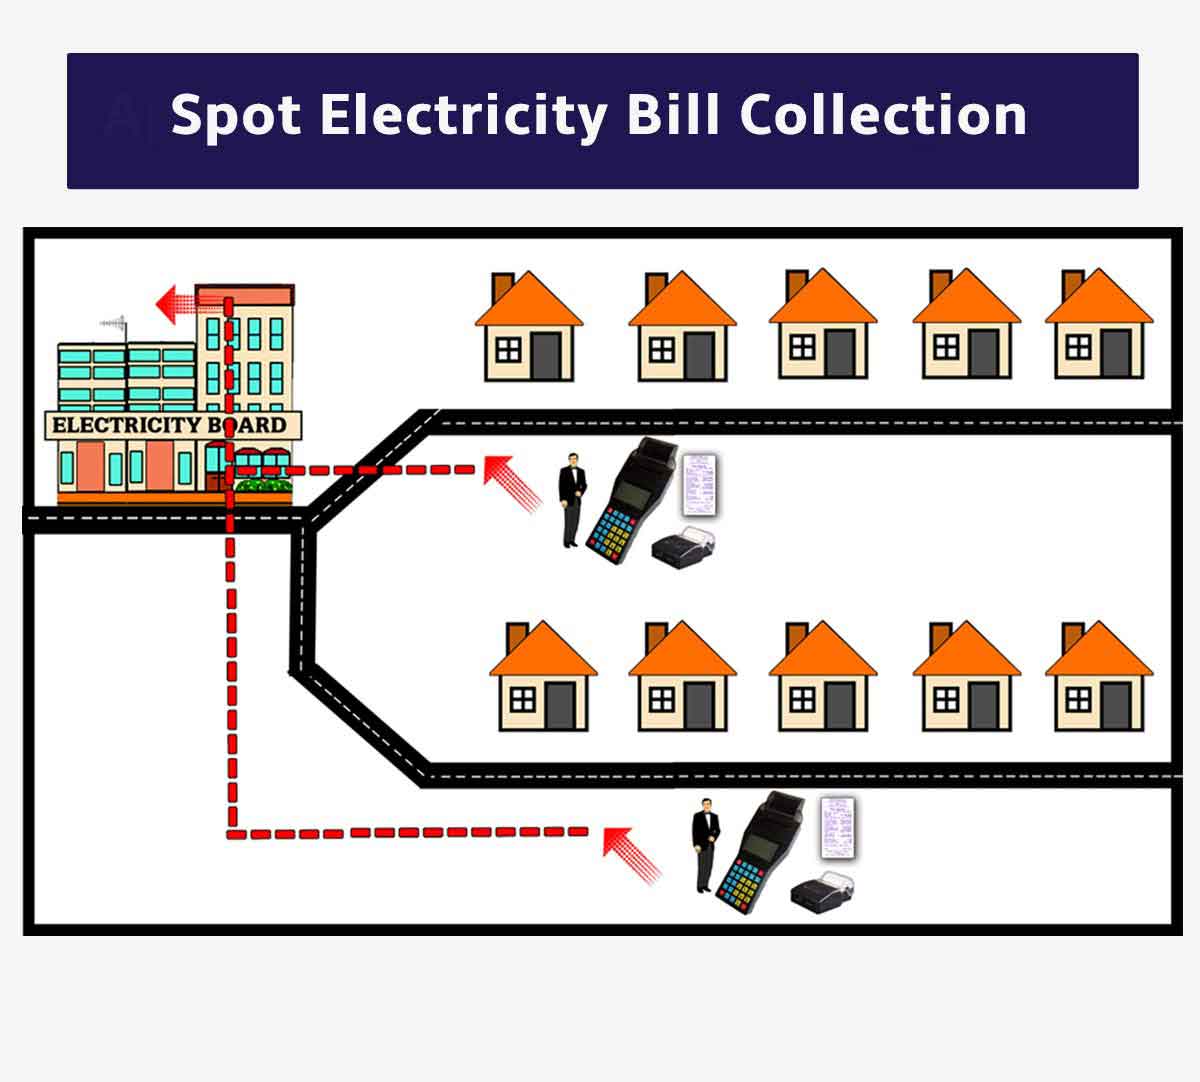 Spot Electricity Billing Software Solutions Trivandrum, India